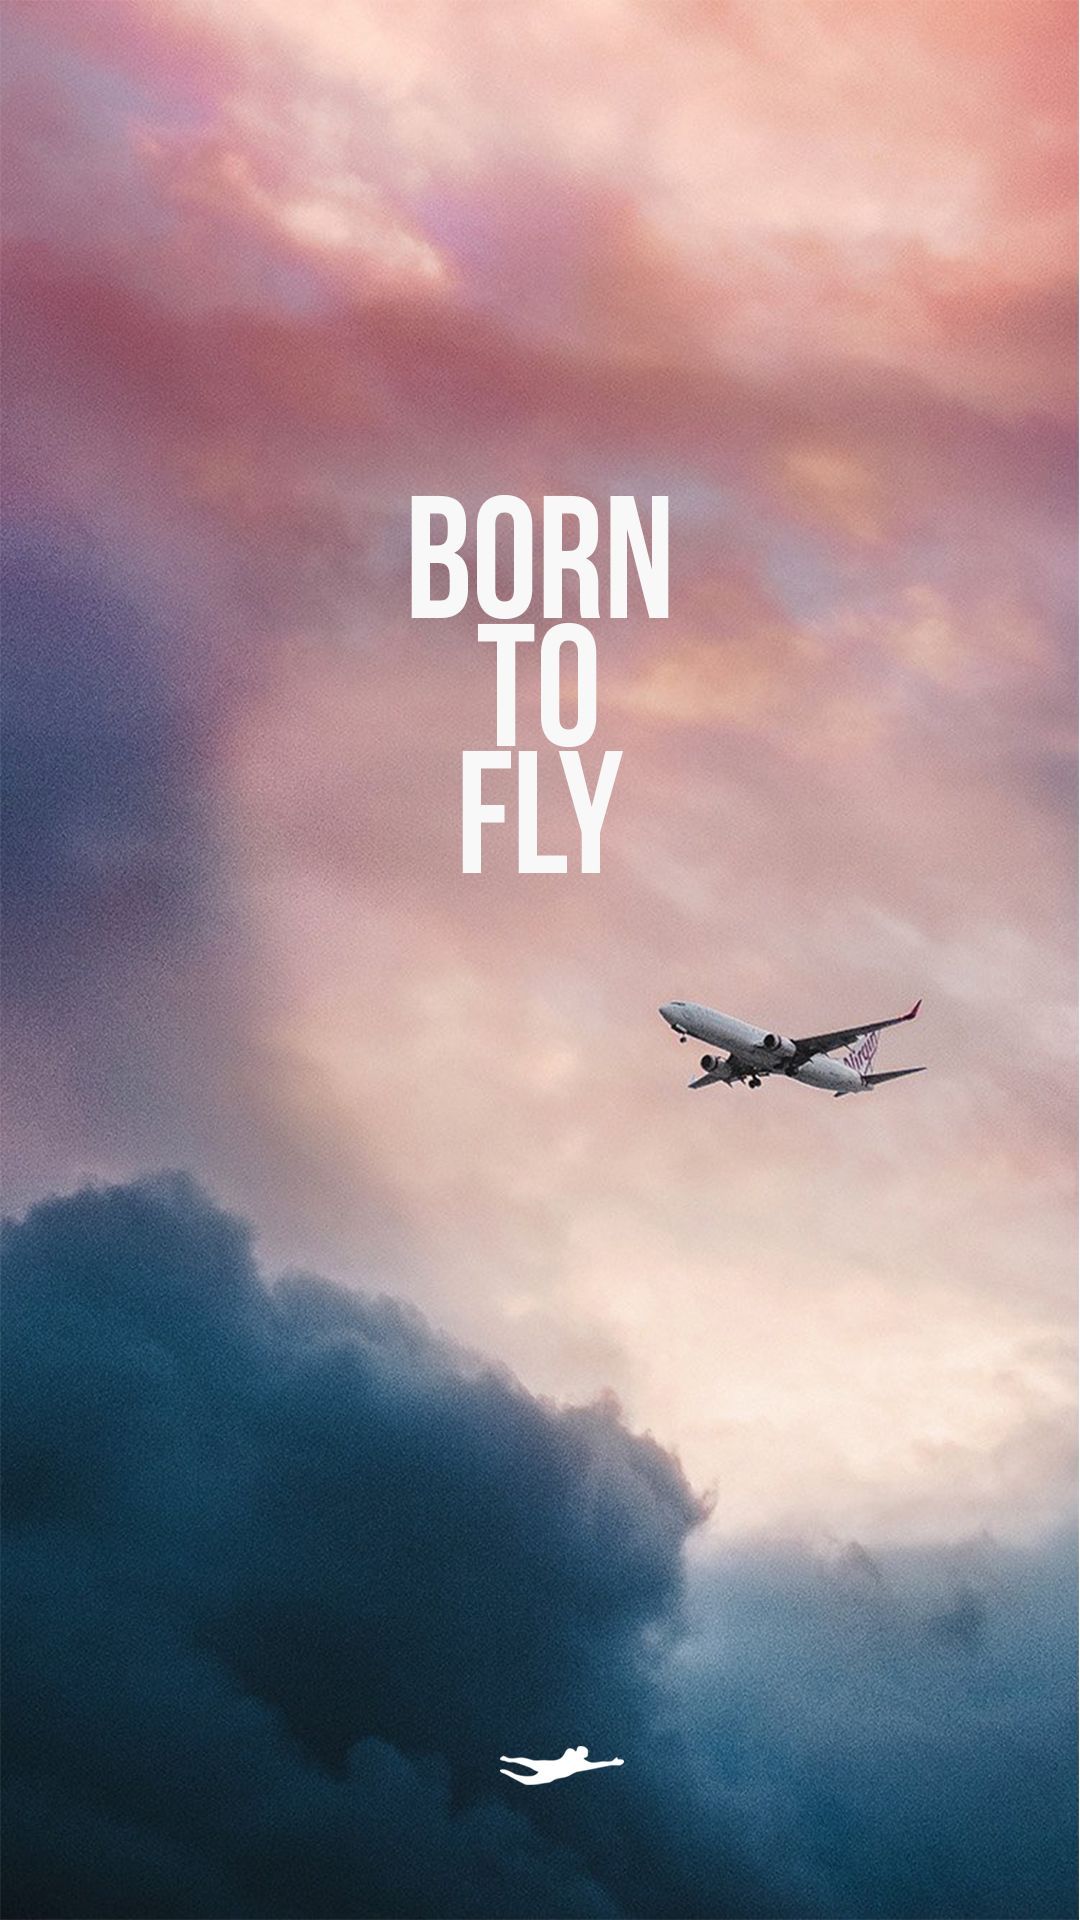 Born to fly. Goalkeeper Lifestyle. Airplane wallpaper, Fly quotes, Airplane photography